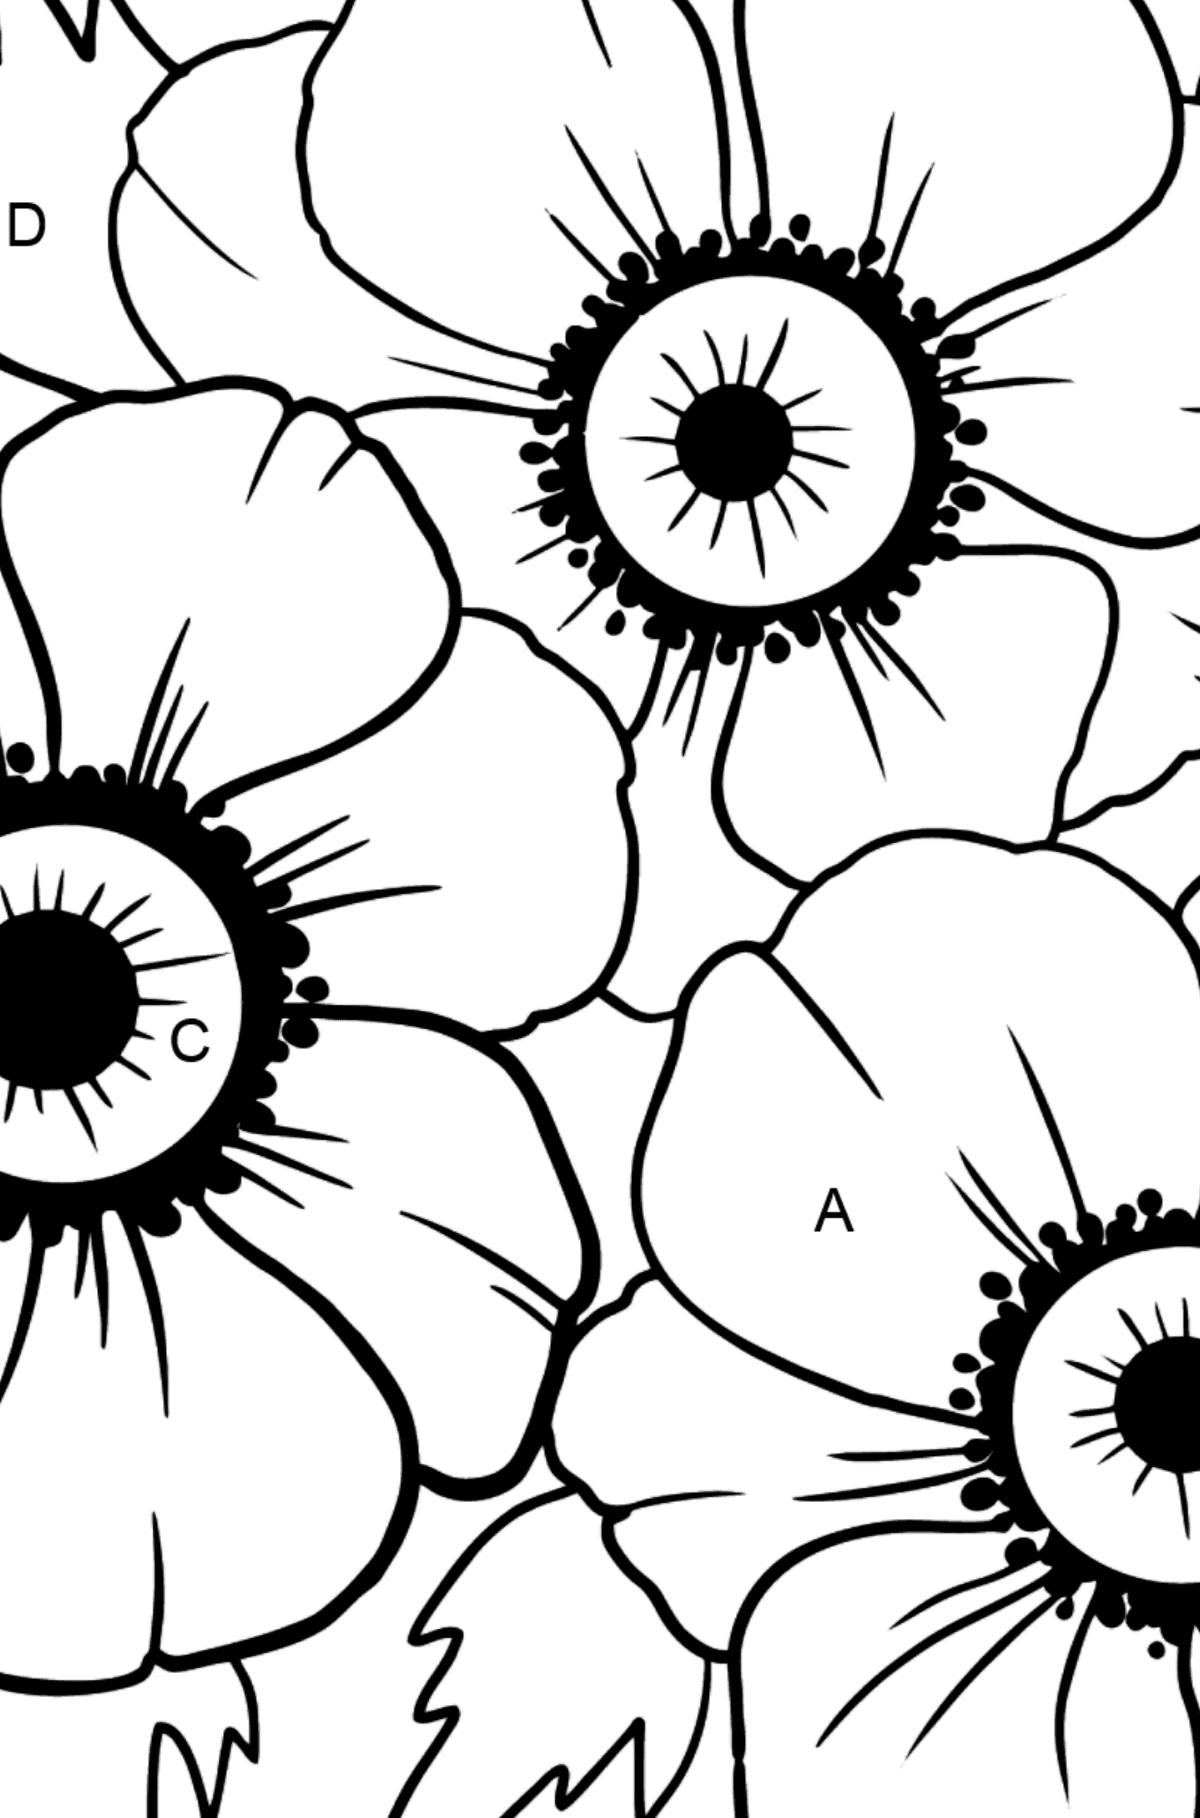 Coloring Page with big flower - A Red and Pink Anemone Coronaria - Coloring by Letters for Kids